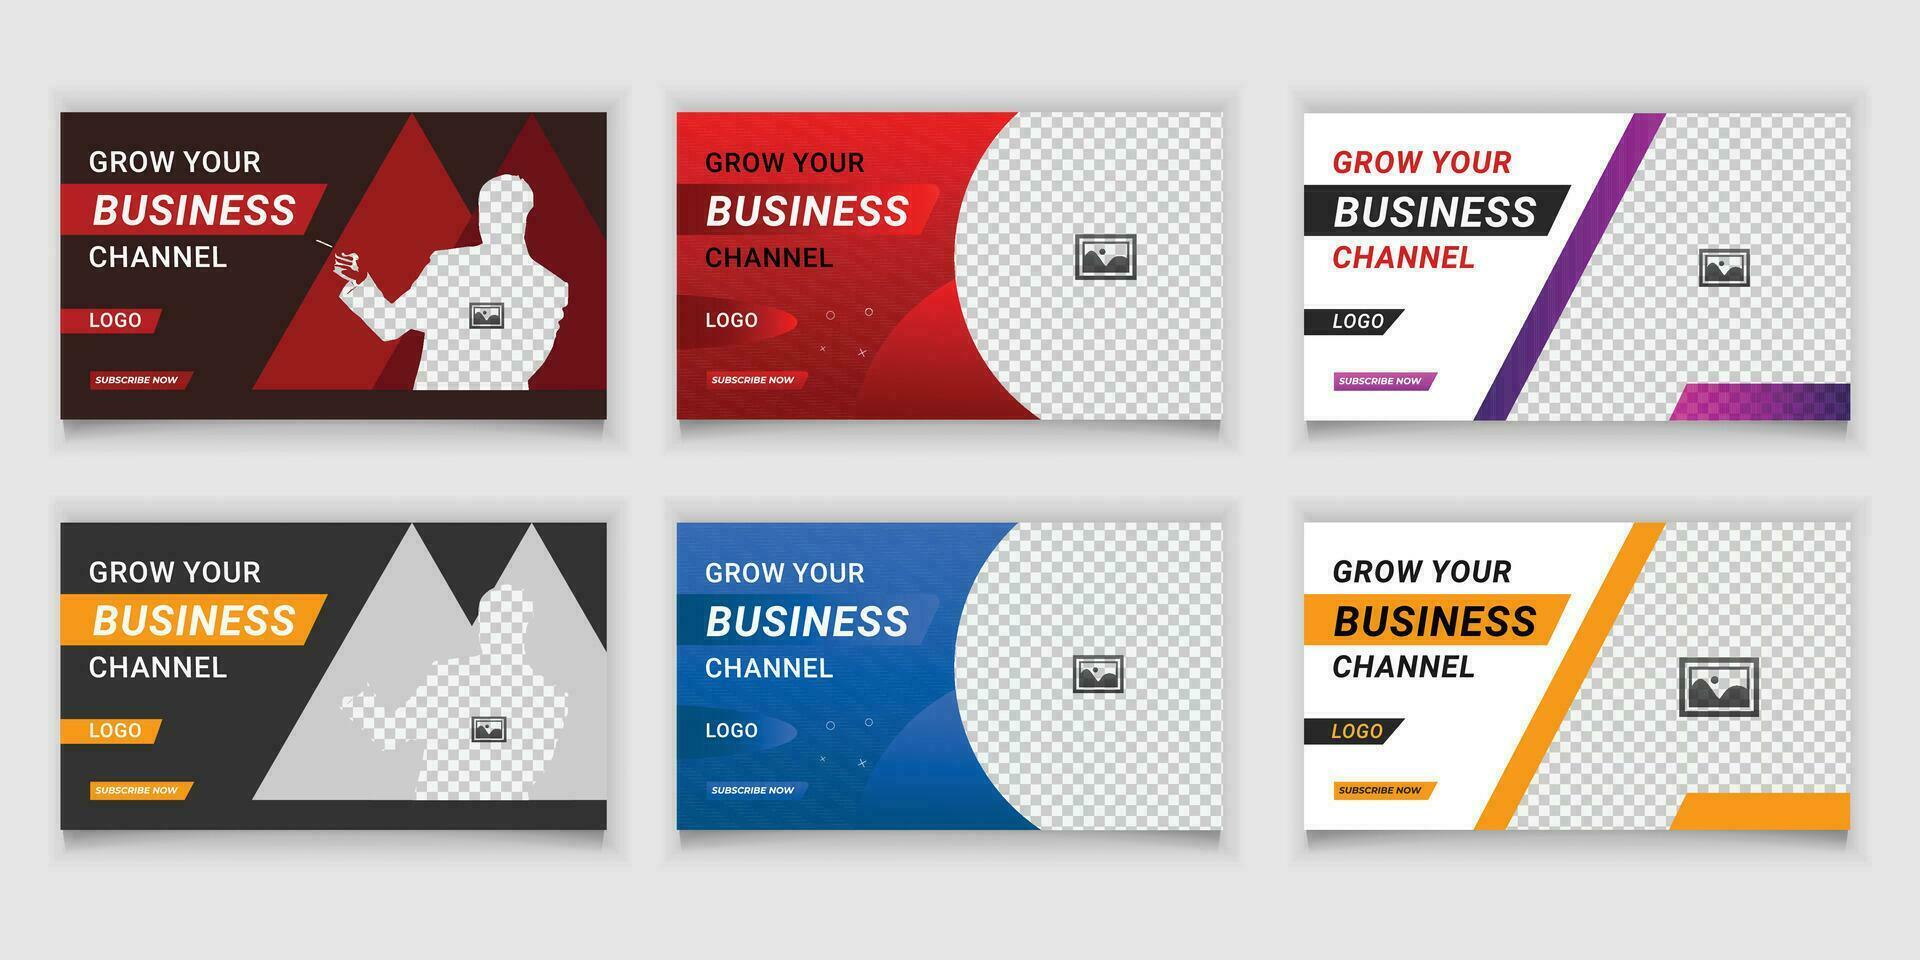 Bundle Online Business Video Thumbnail and Social Media Or Web Banner Template Design vector